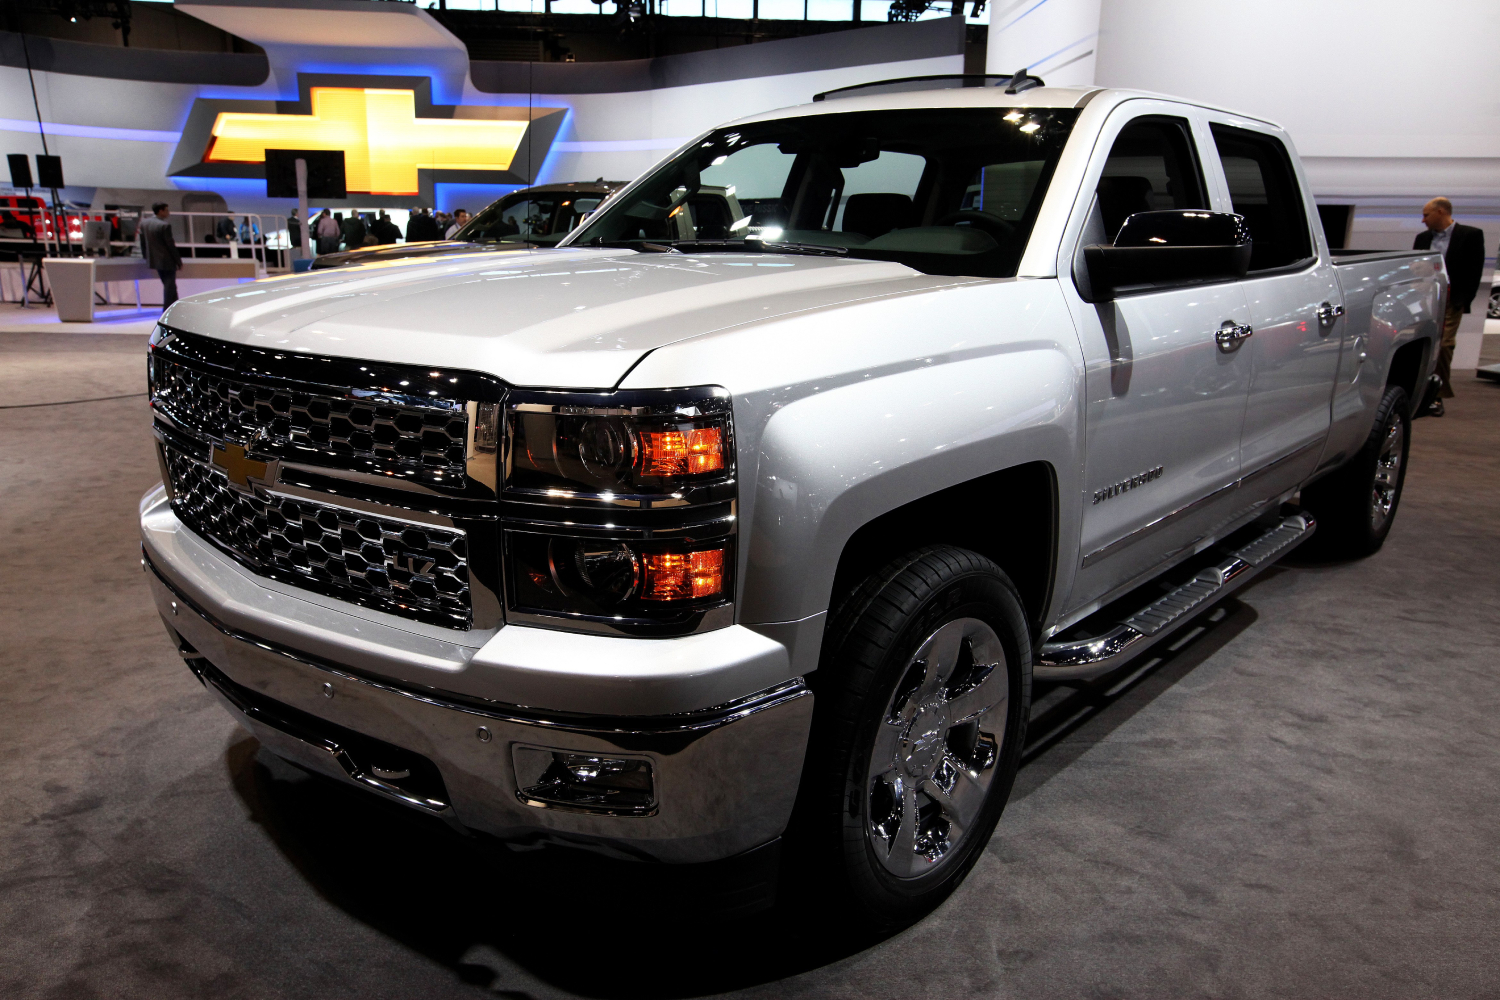 The best used Chevy Silverado pickup truck years